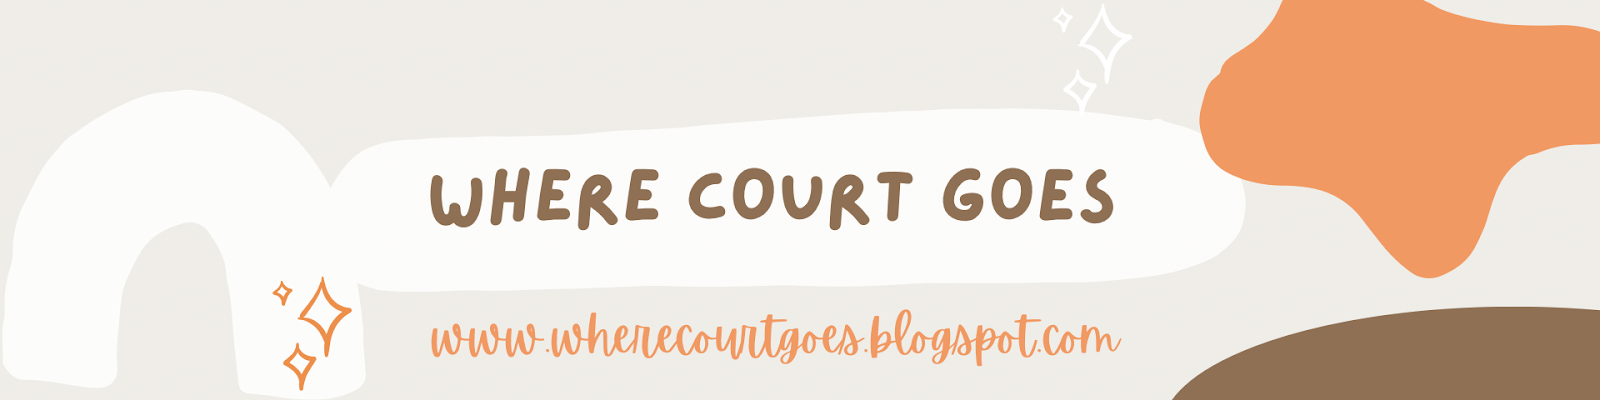 Where Court Goes!